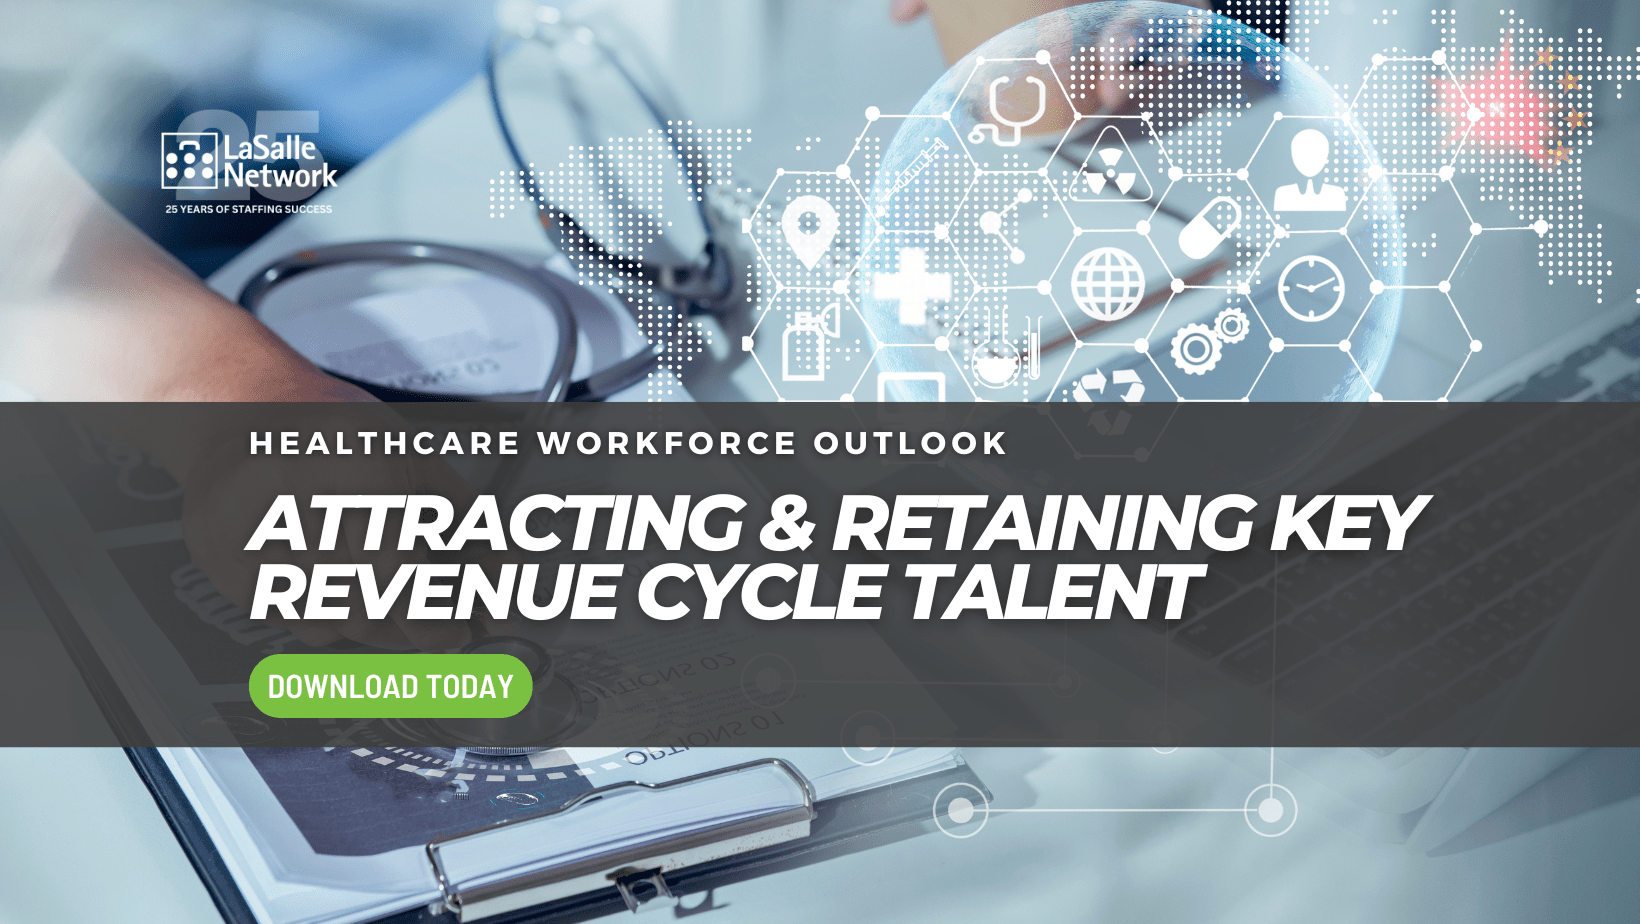 Attracting & retaining key revenue cycle talent